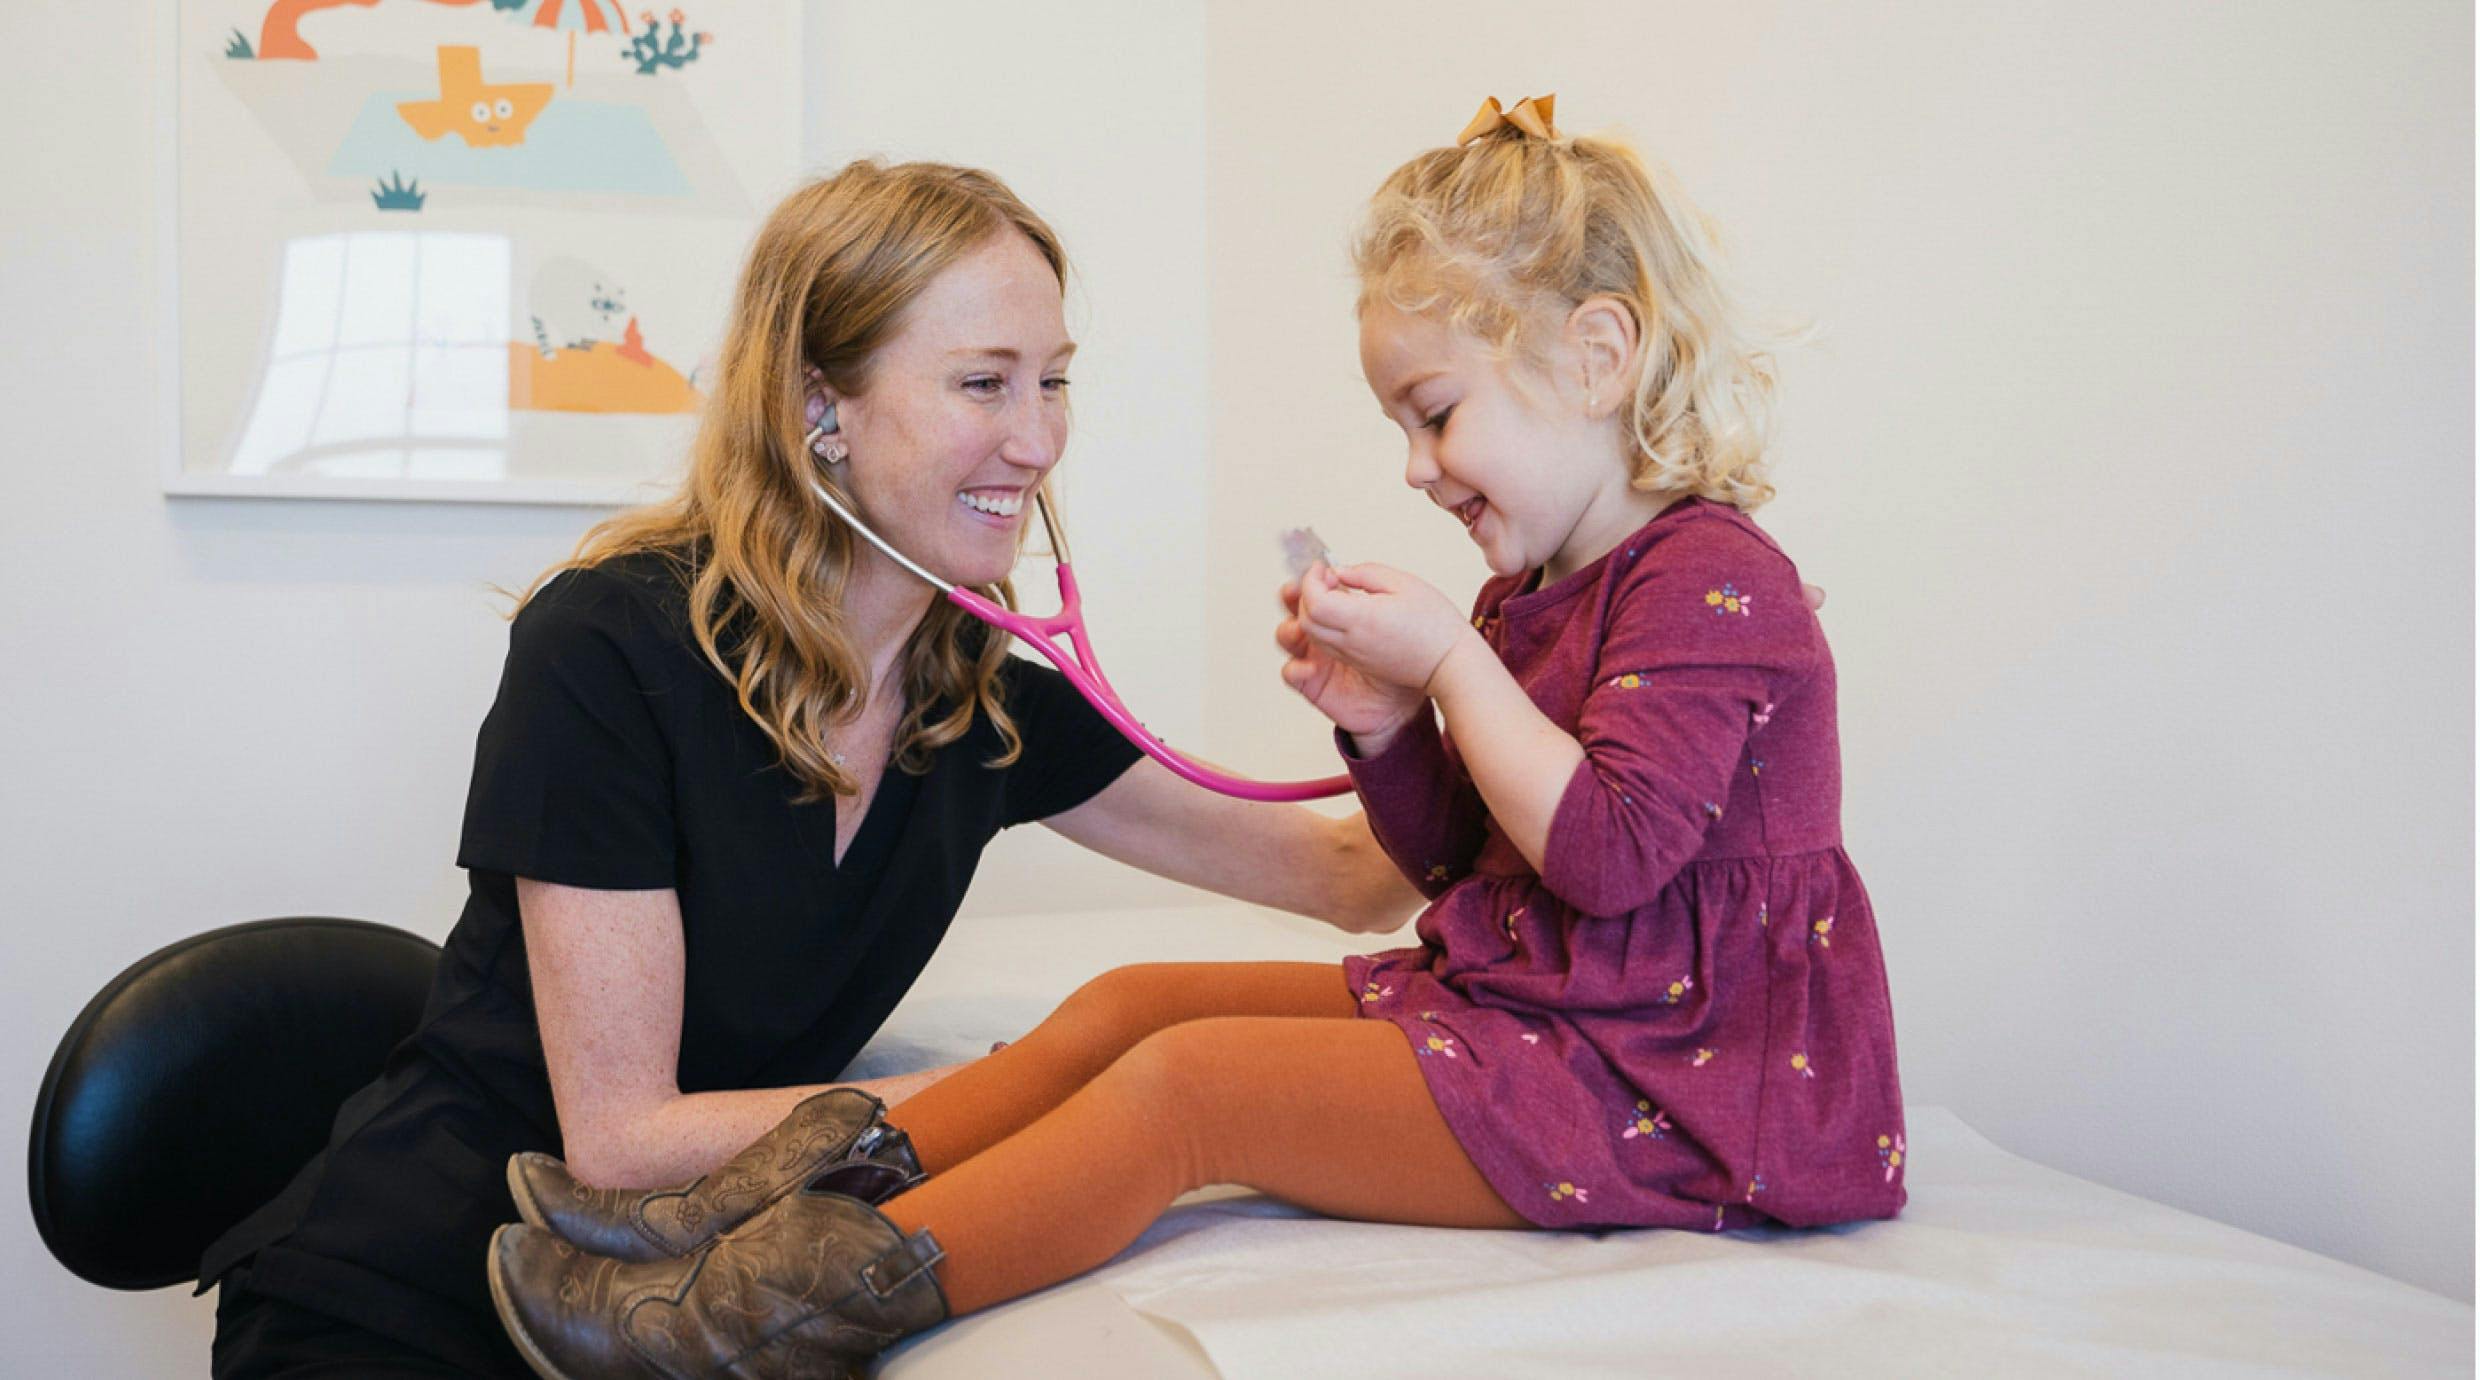 Choosing the right pediatric clinic for your family